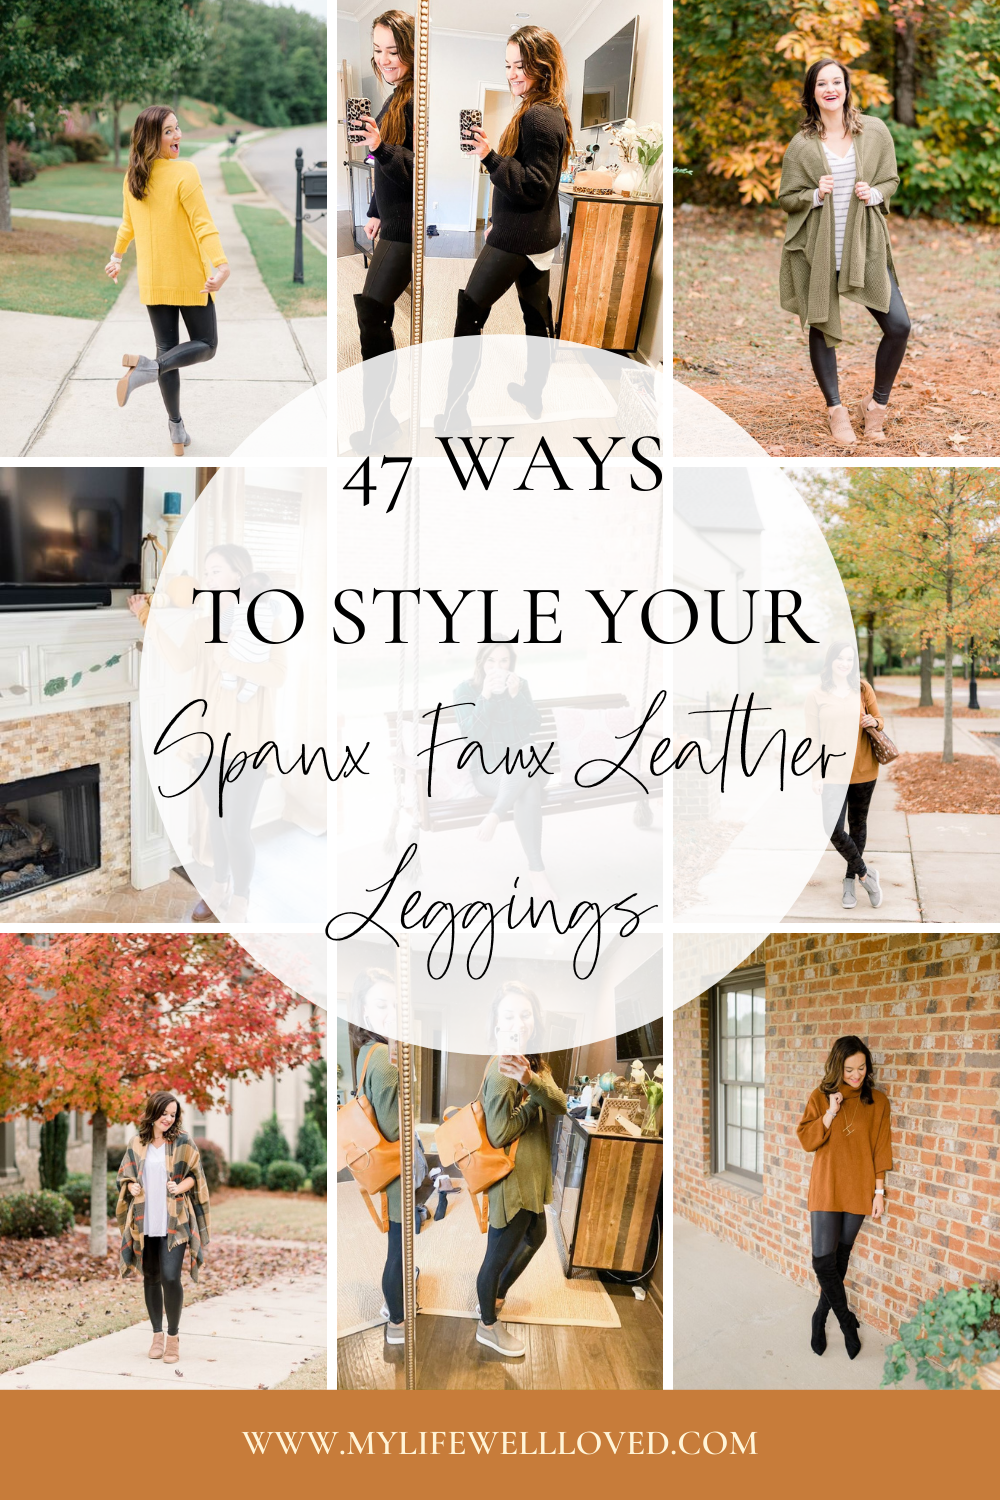 Spanx Leather Leggings Outfits